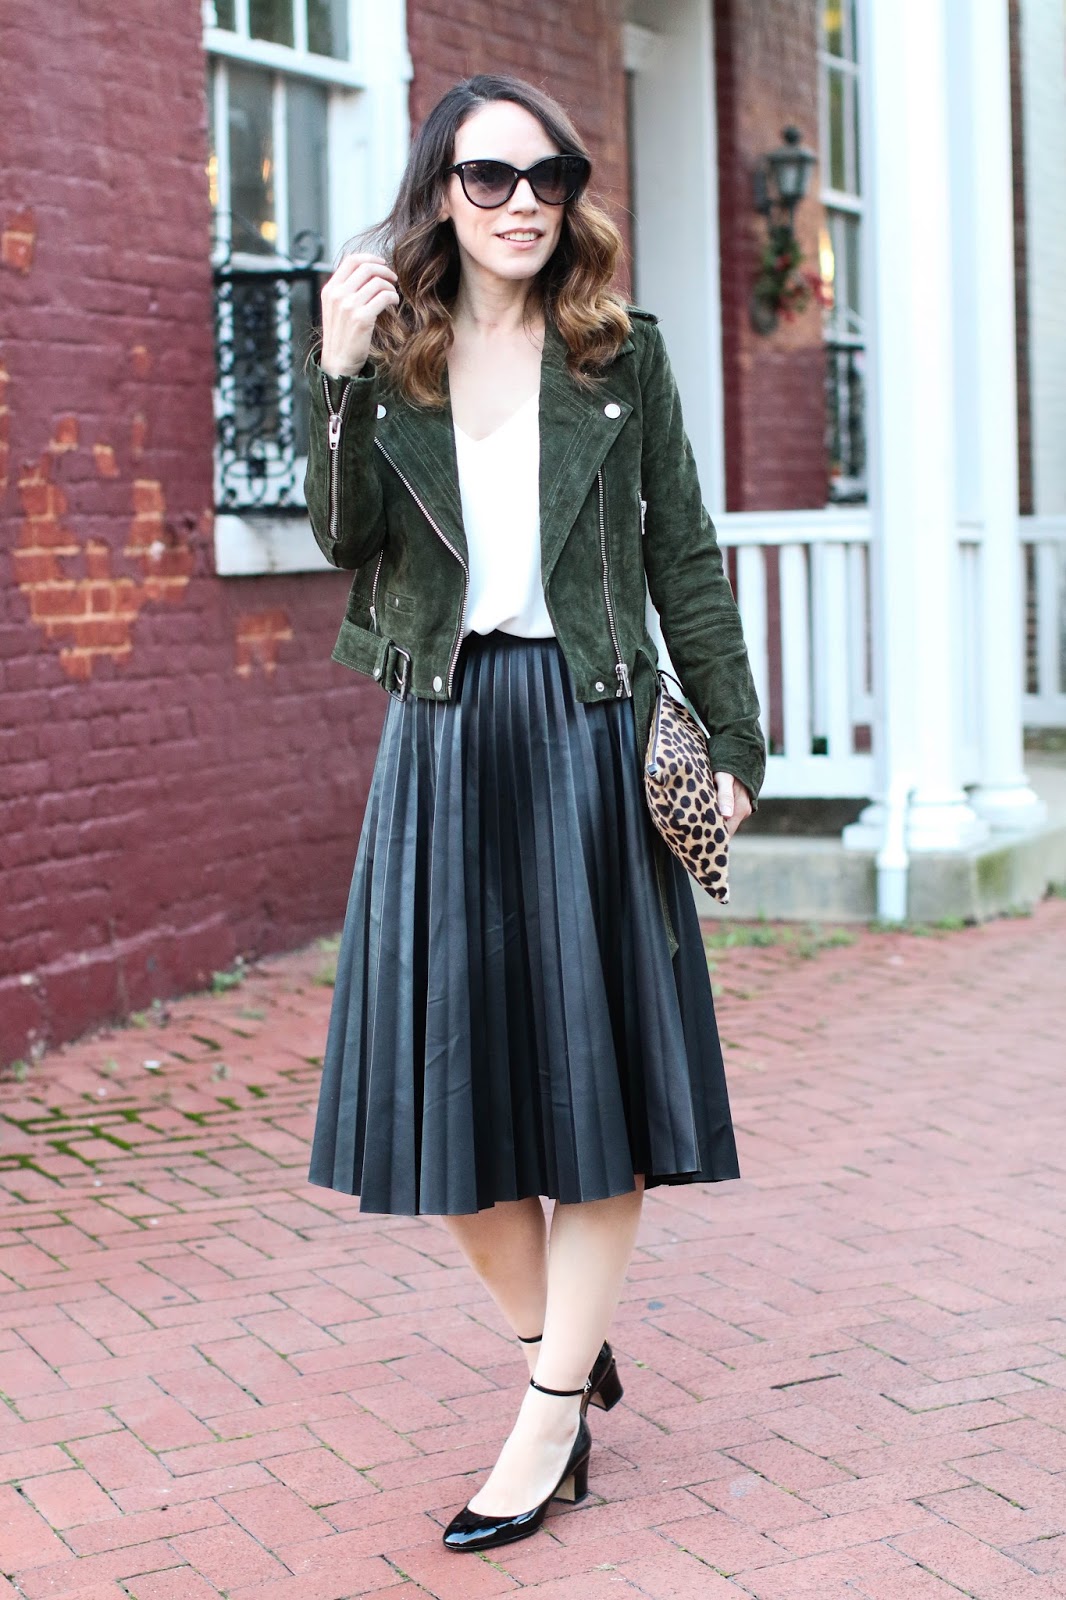 How to Style a Moto Jacket With a Midi Skirt - alittlebitetc